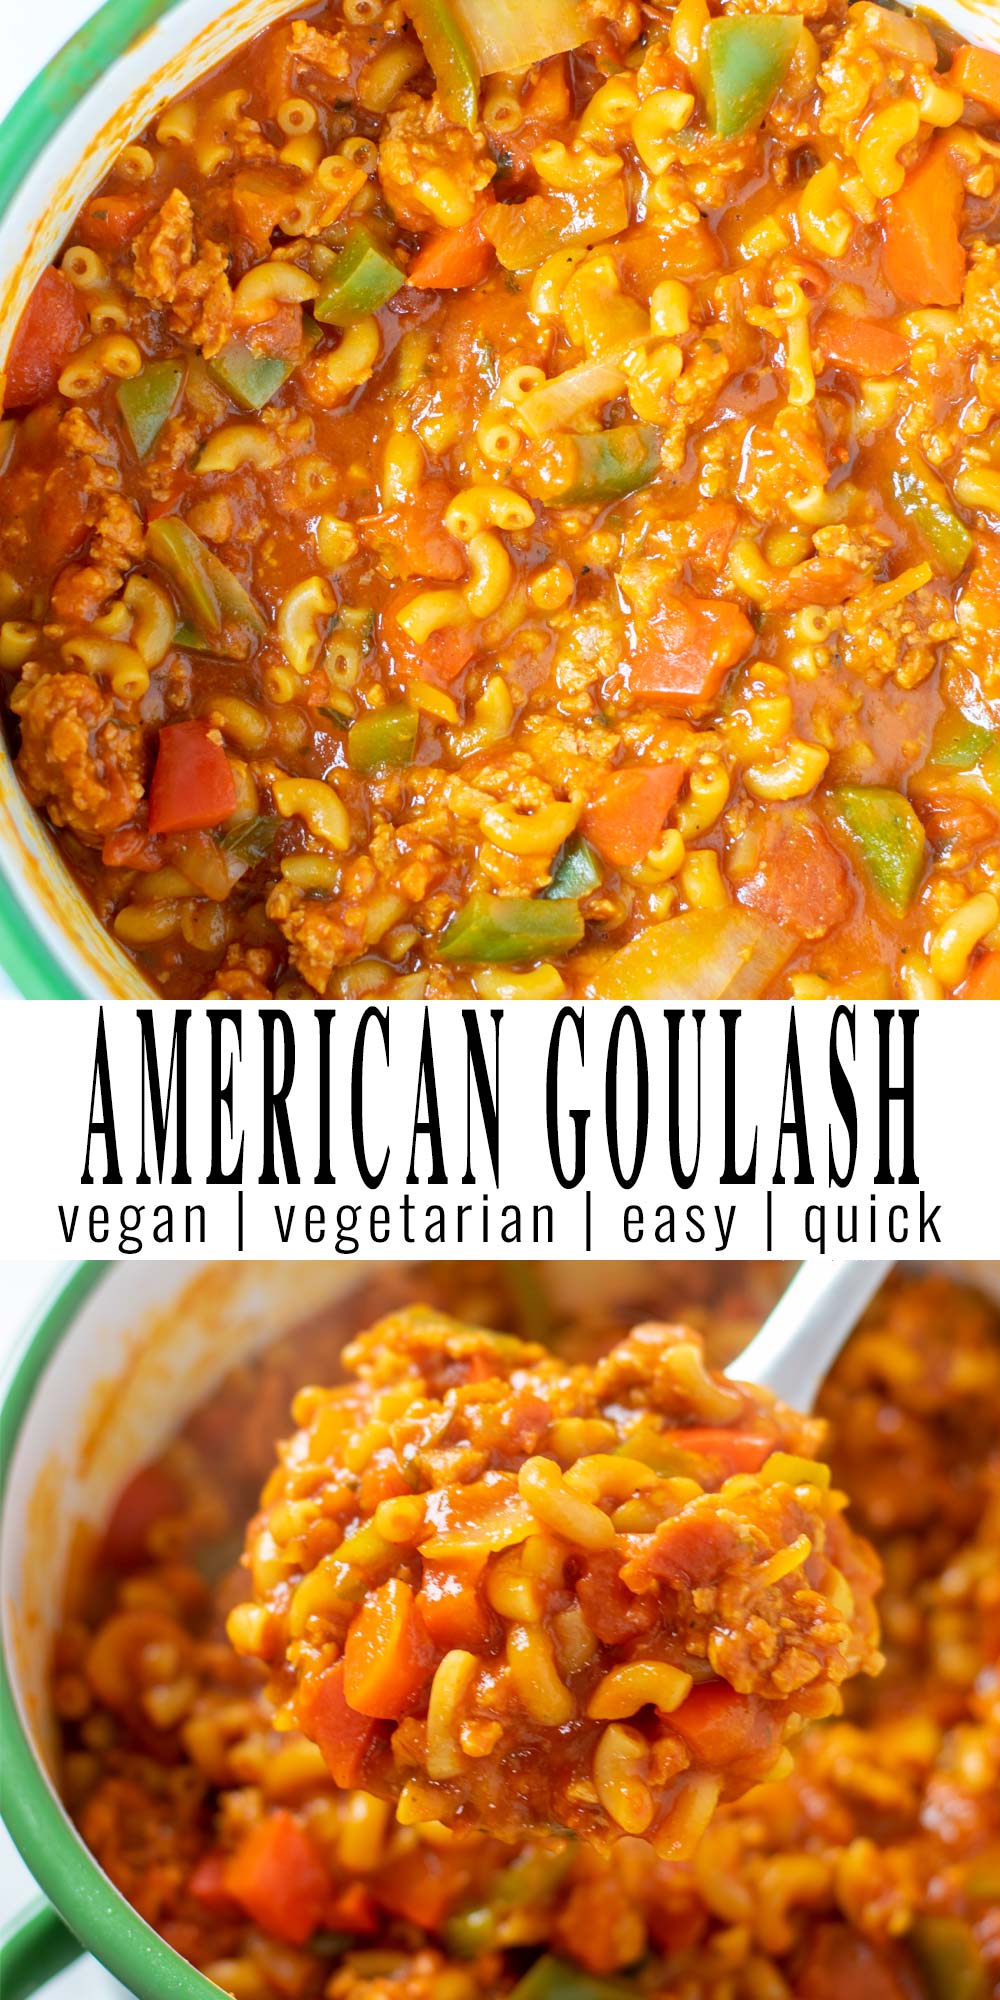 Collage of two pictures of the American Goulash with recipe title text.